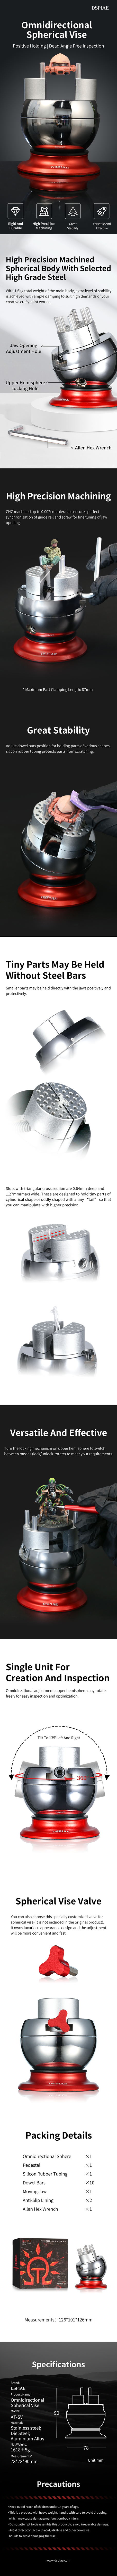 Dspiae AT-SV Omnidirectional Spherical Vise